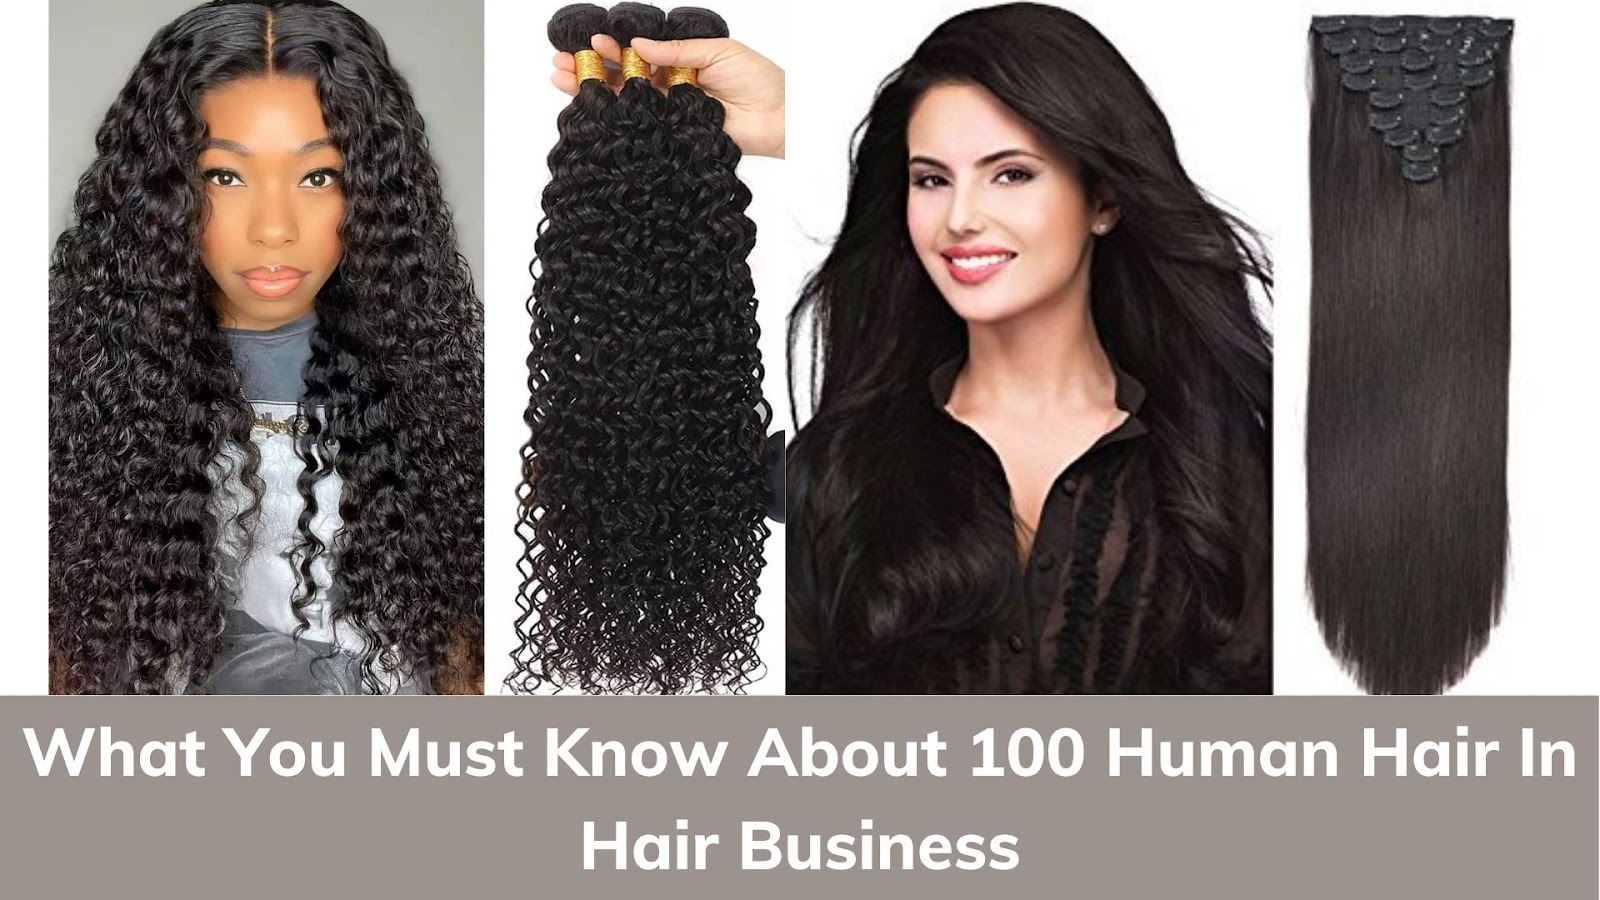 What You Must Know About 100 Human Hair In Hair Business